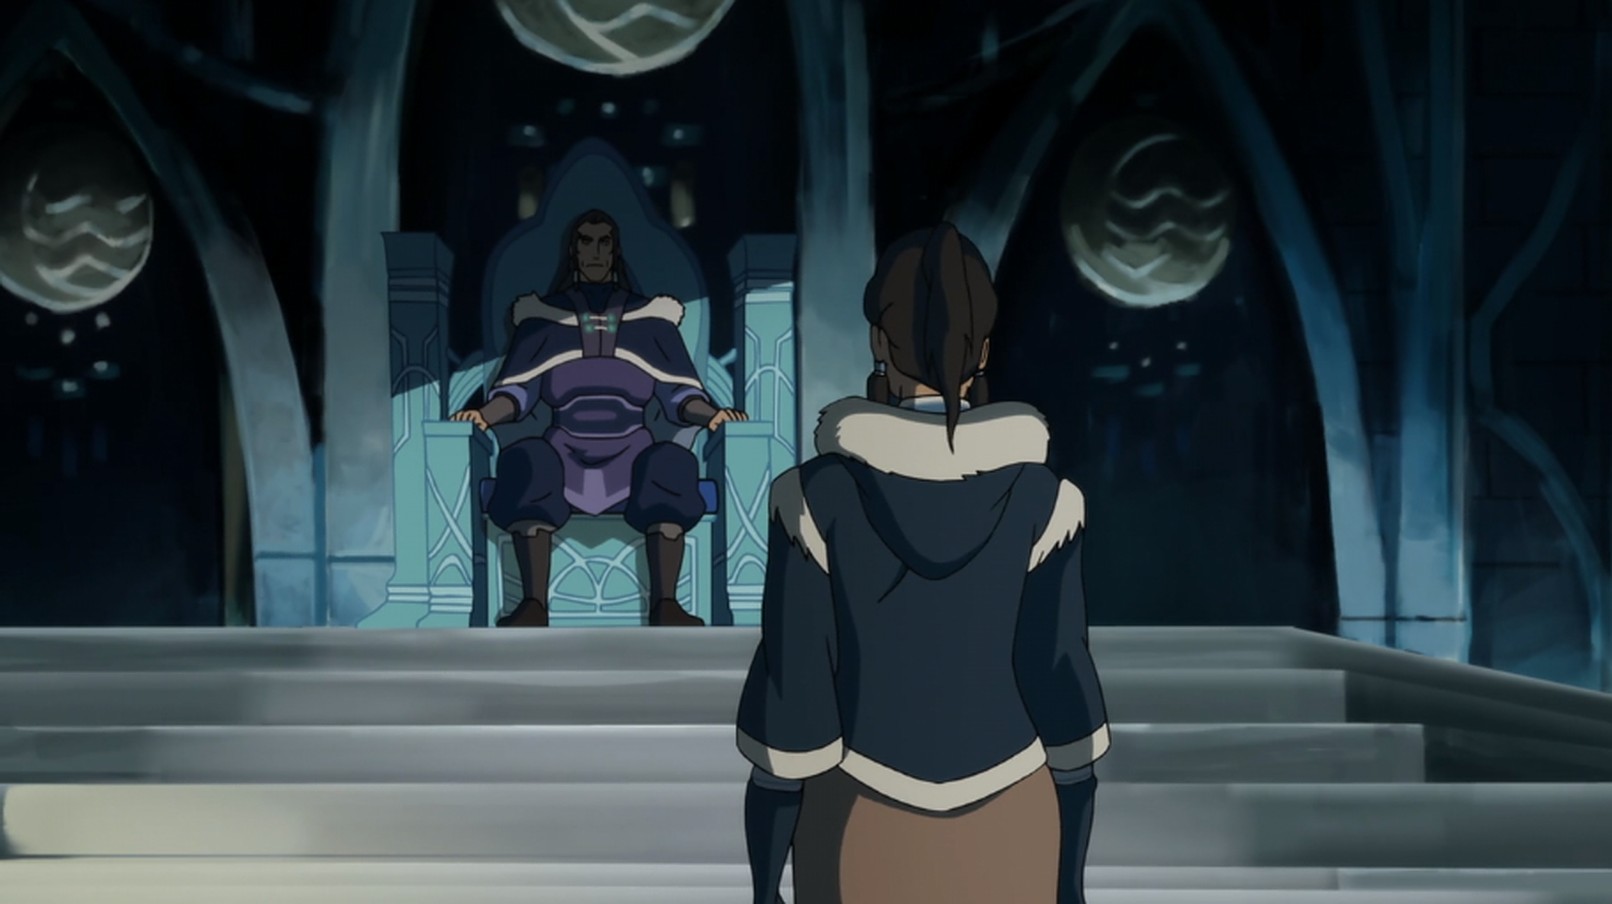 Korra and Unalaq from The Legend of Korra in the Southern Water Tribe throne room